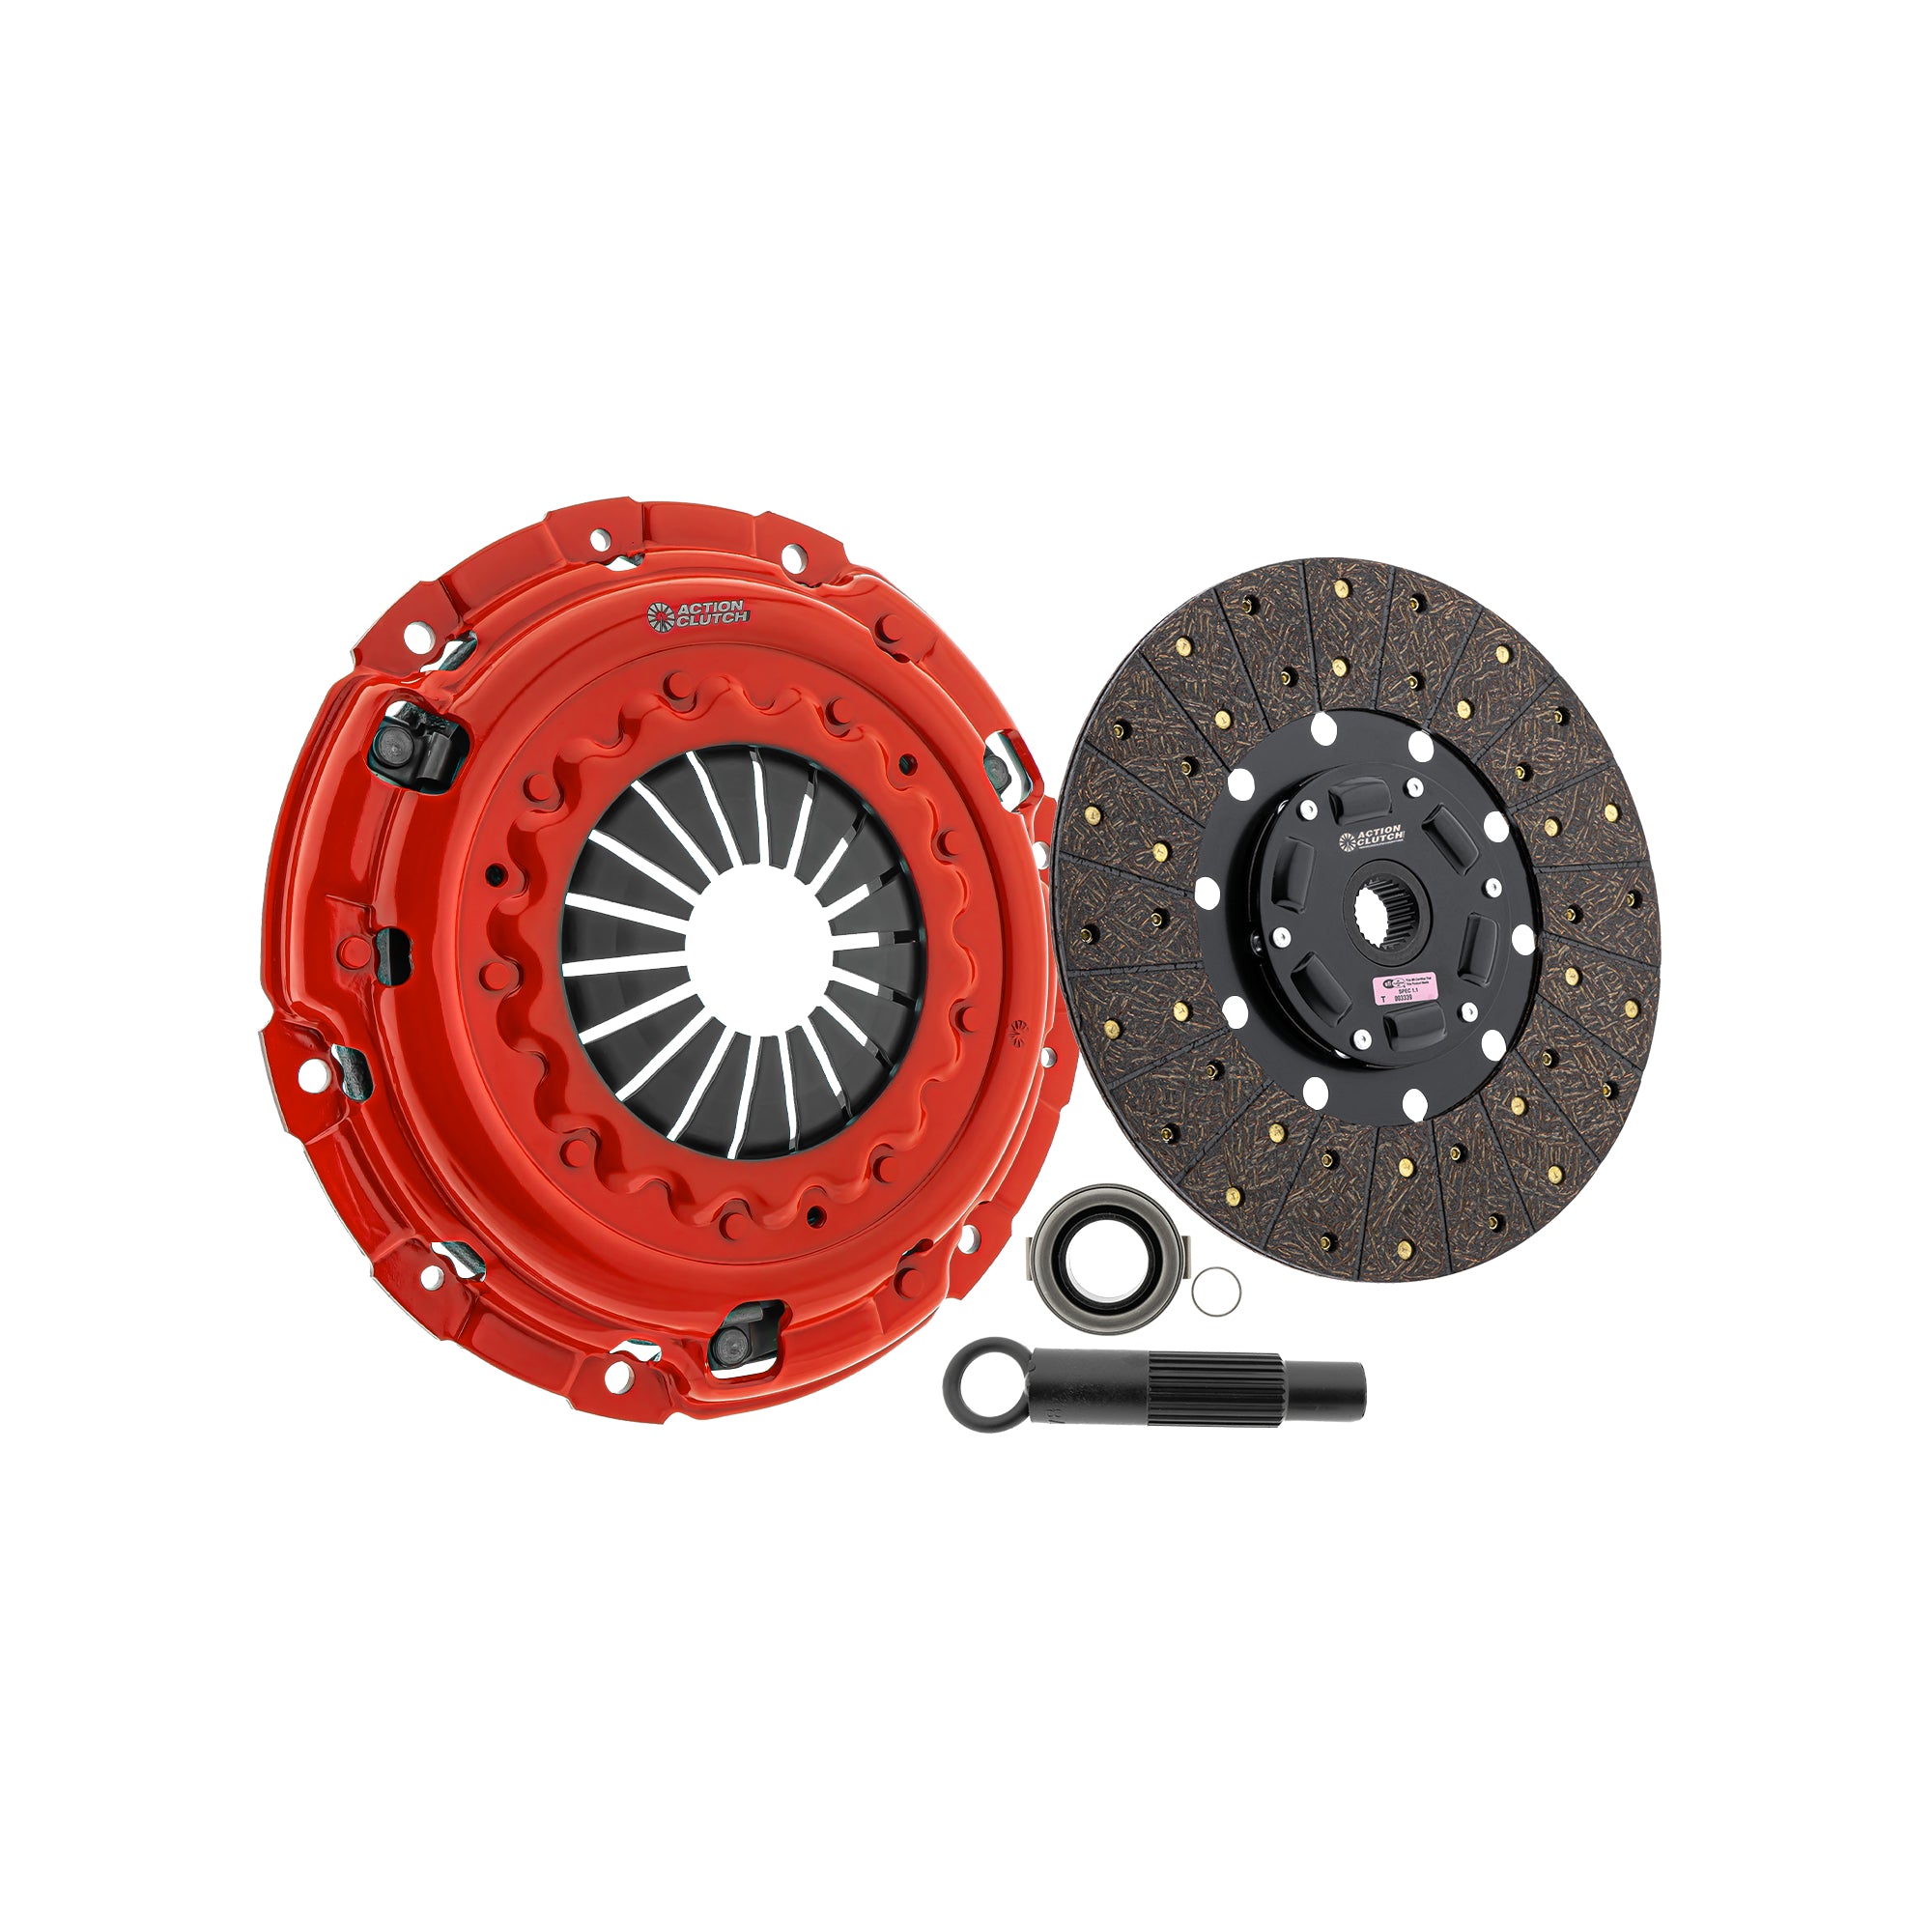 Action Clutch Stage 1 Clutch Kit (02-06 RSX)